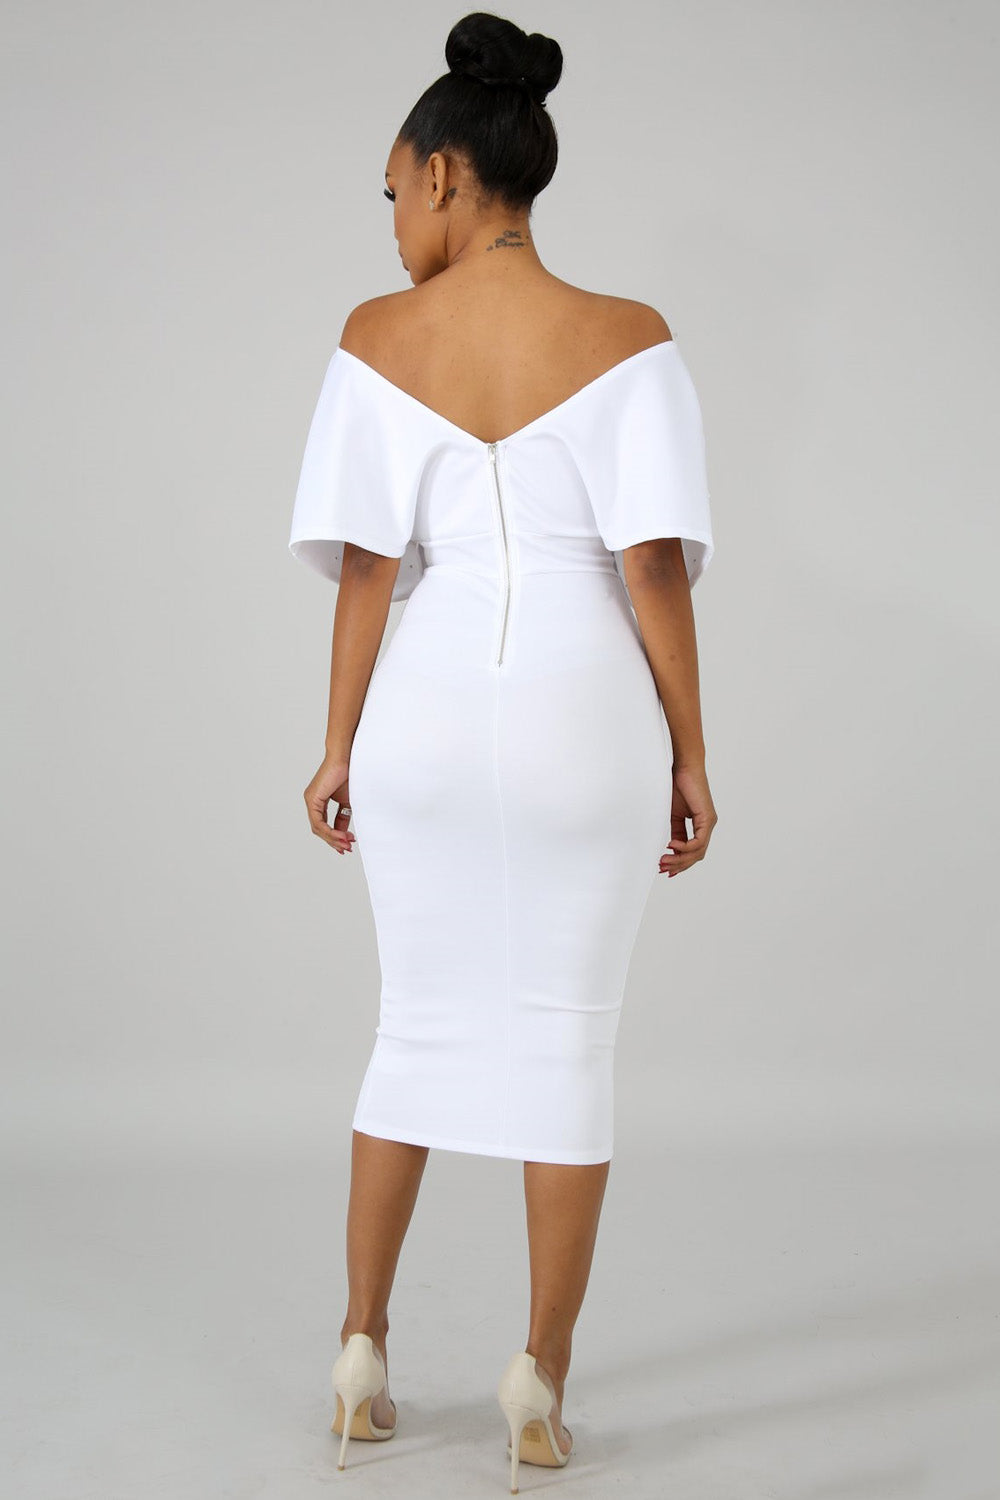 goPals fitted white midi length dress with off-the-shoulder neckline and large bow. 